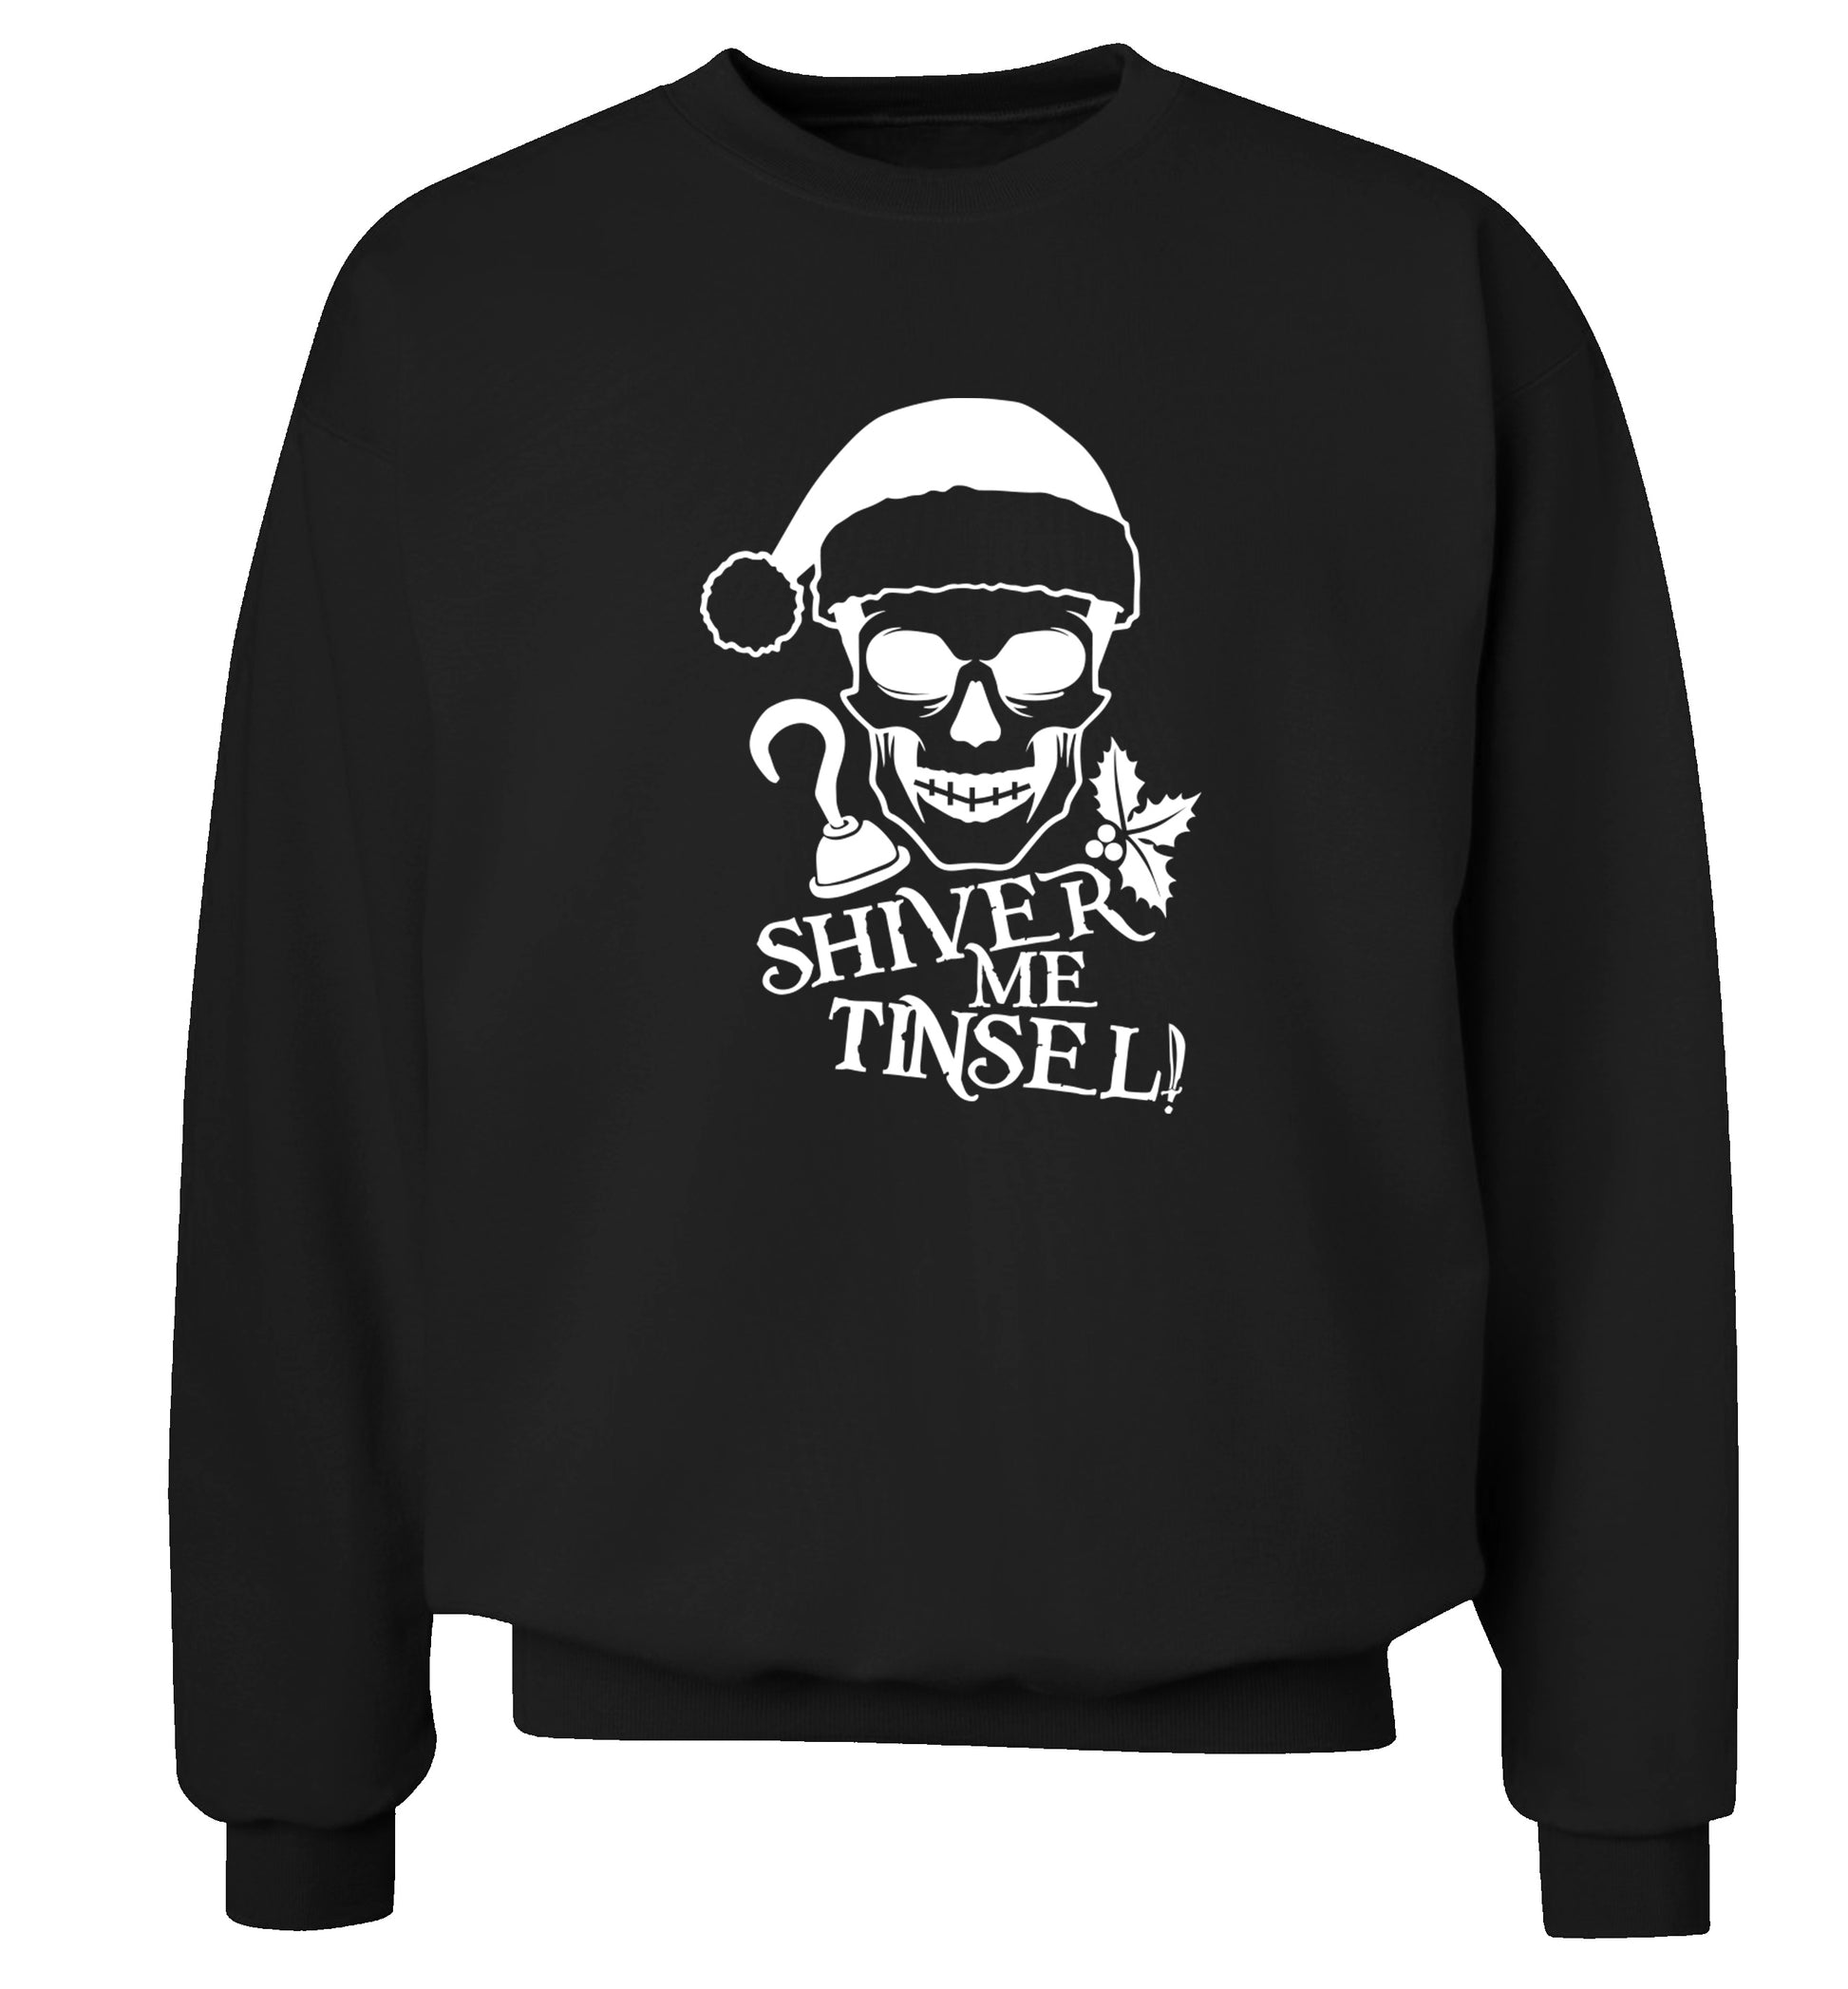 Shiver me tinsel Adult's unisex black Sweater 2XL